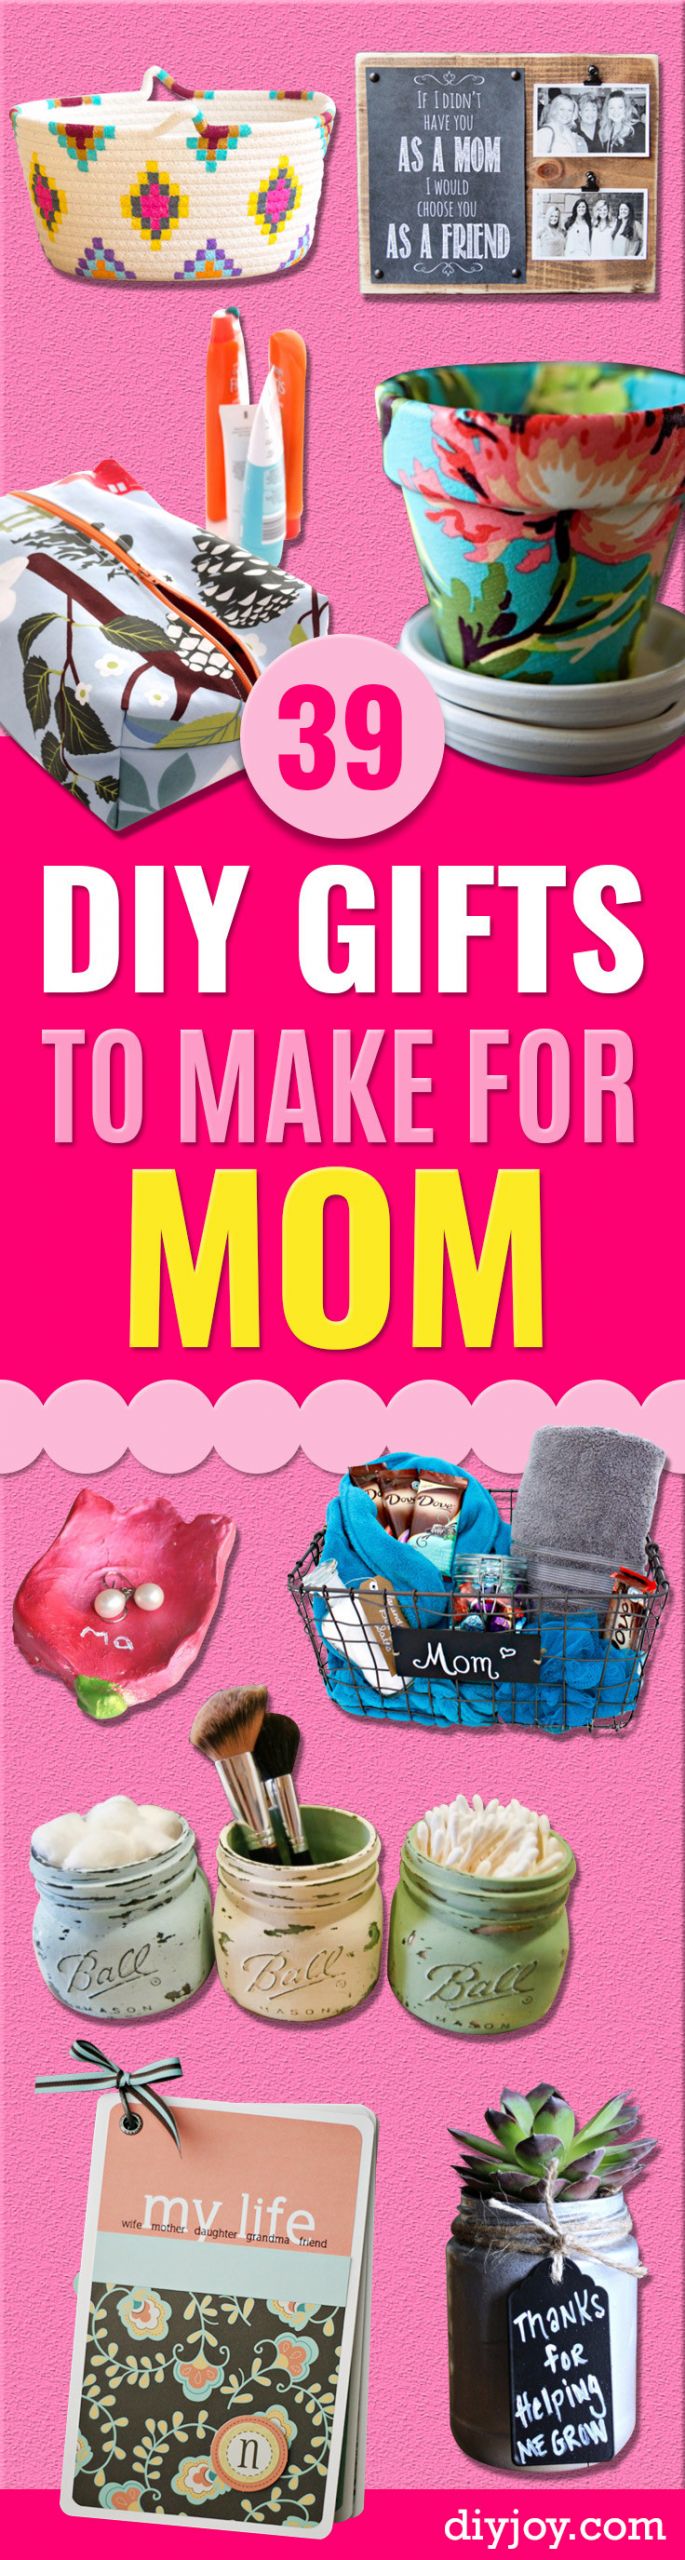 Moms Birthday Gift Ideas
 39 Creative DIY Gifts to Make for Mom